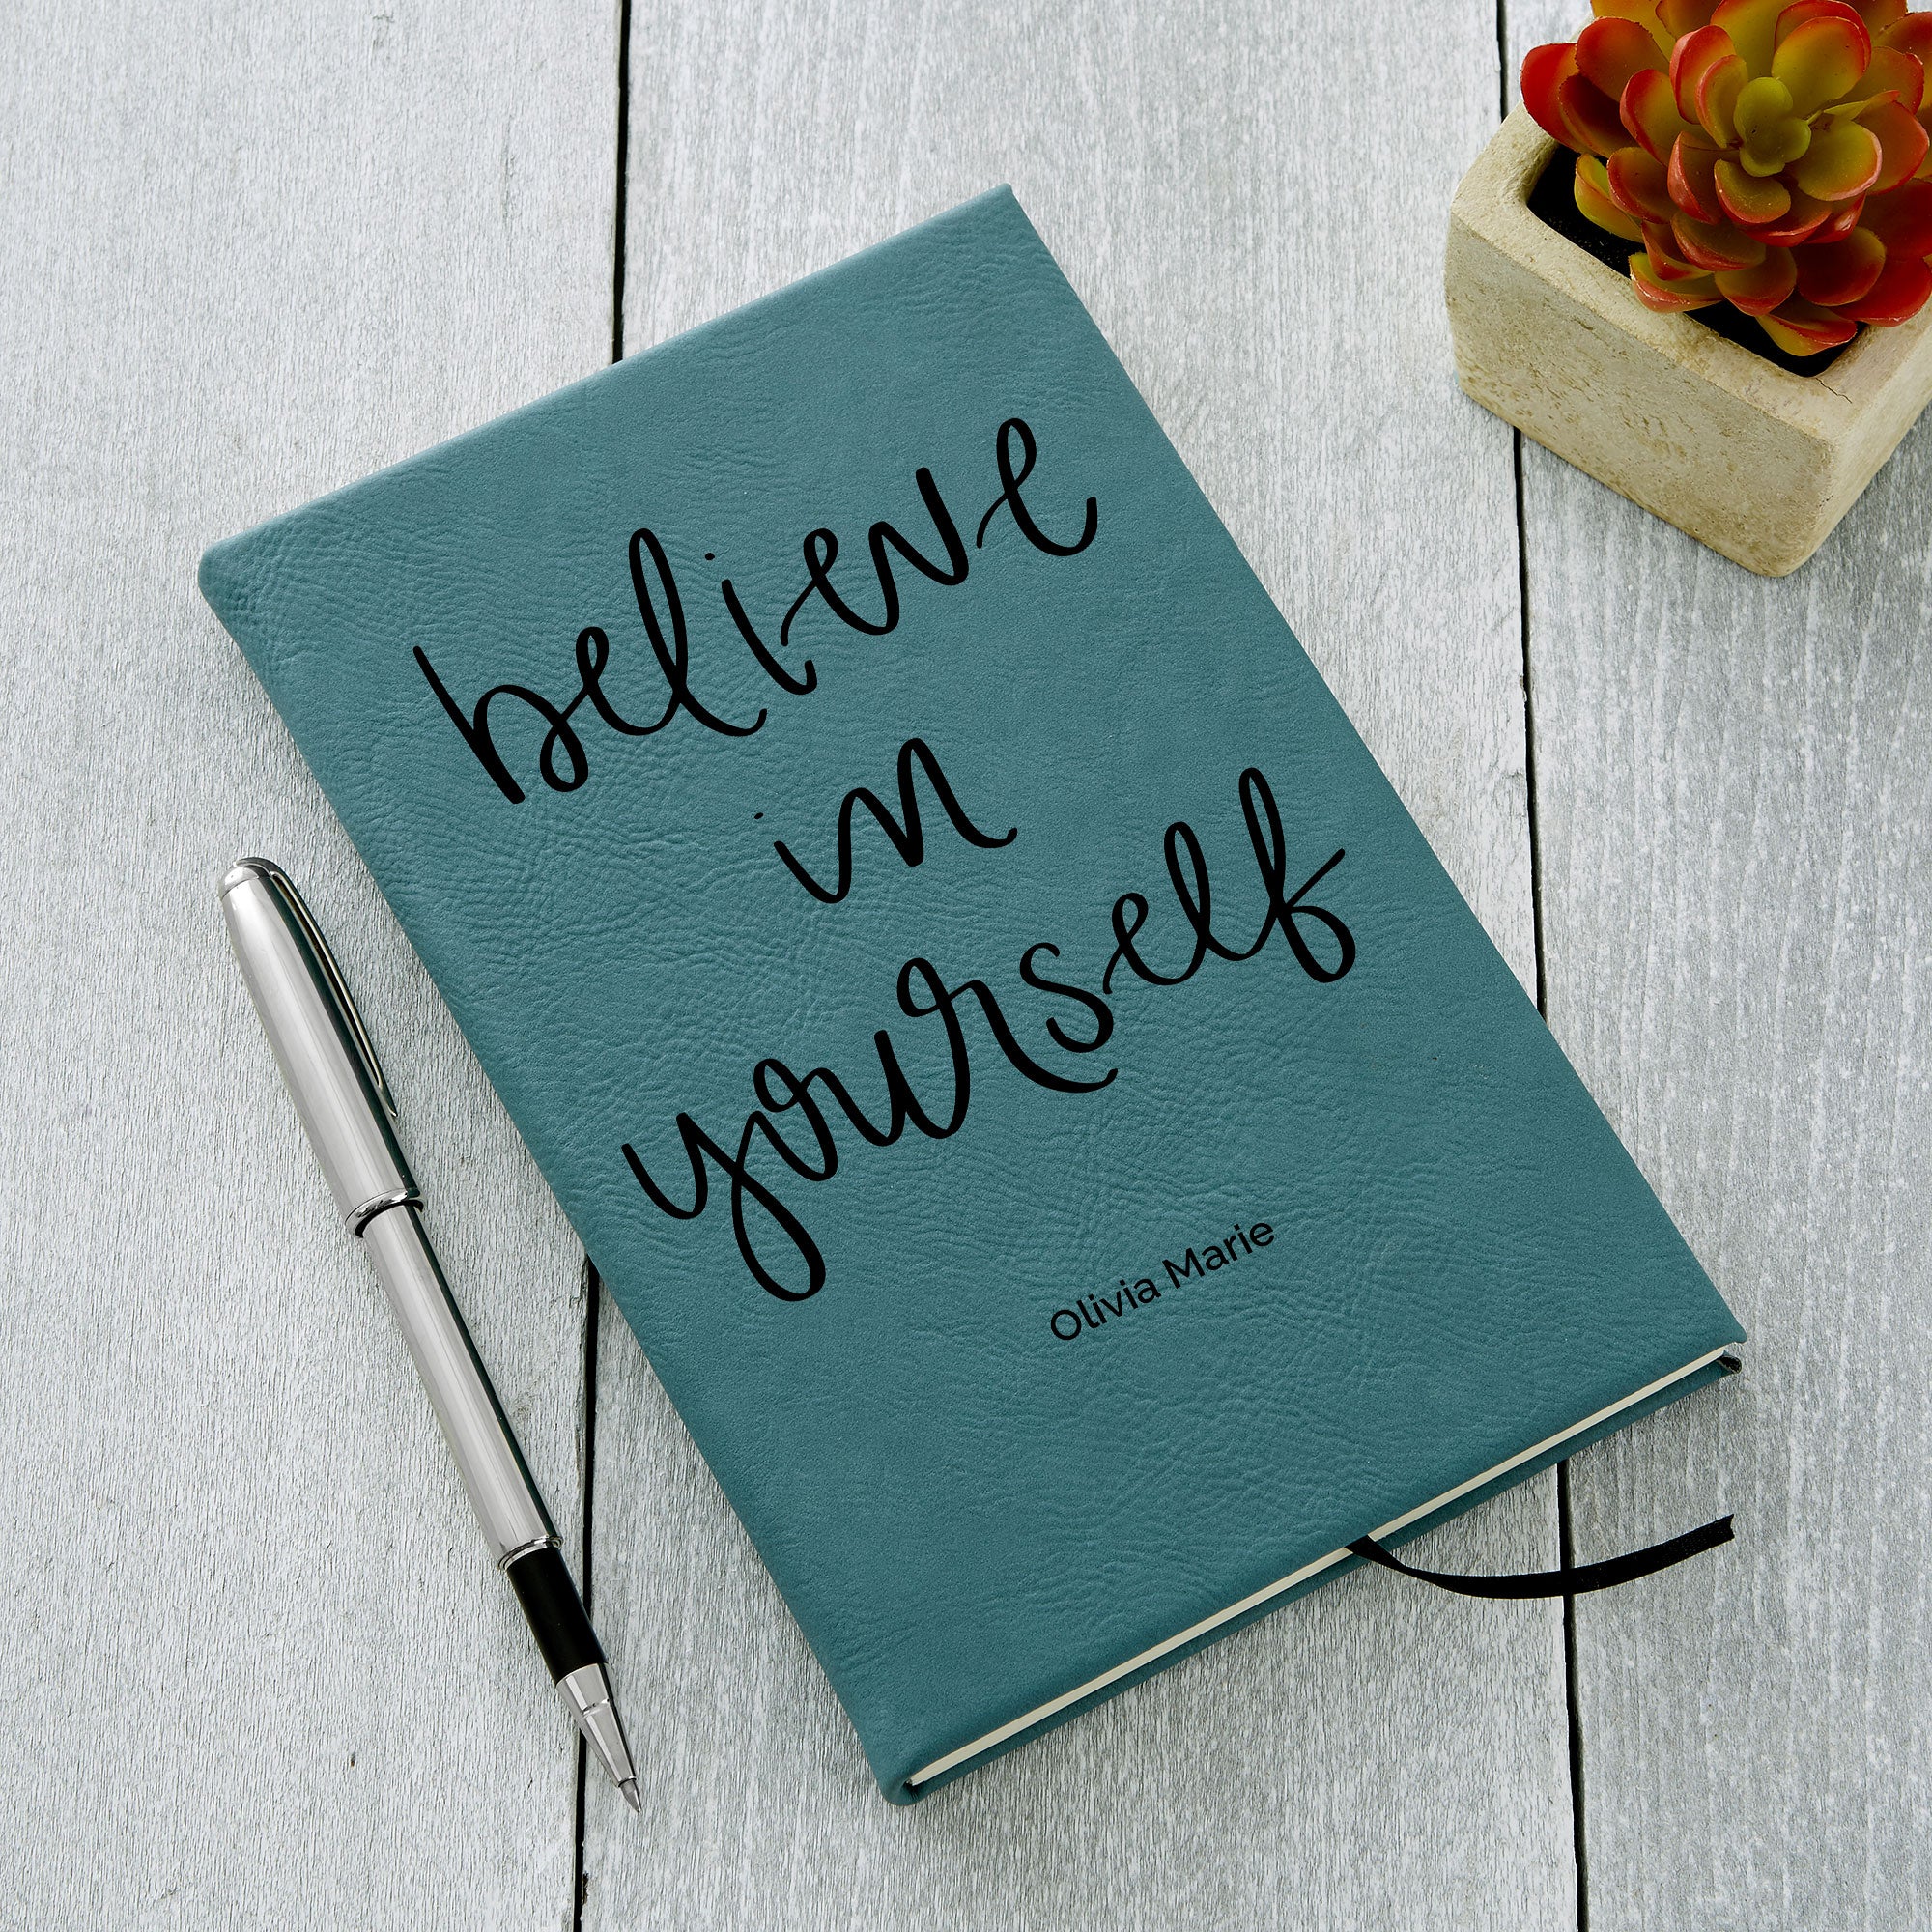 25271 - Believe in Yourself Personalized Writing Journal